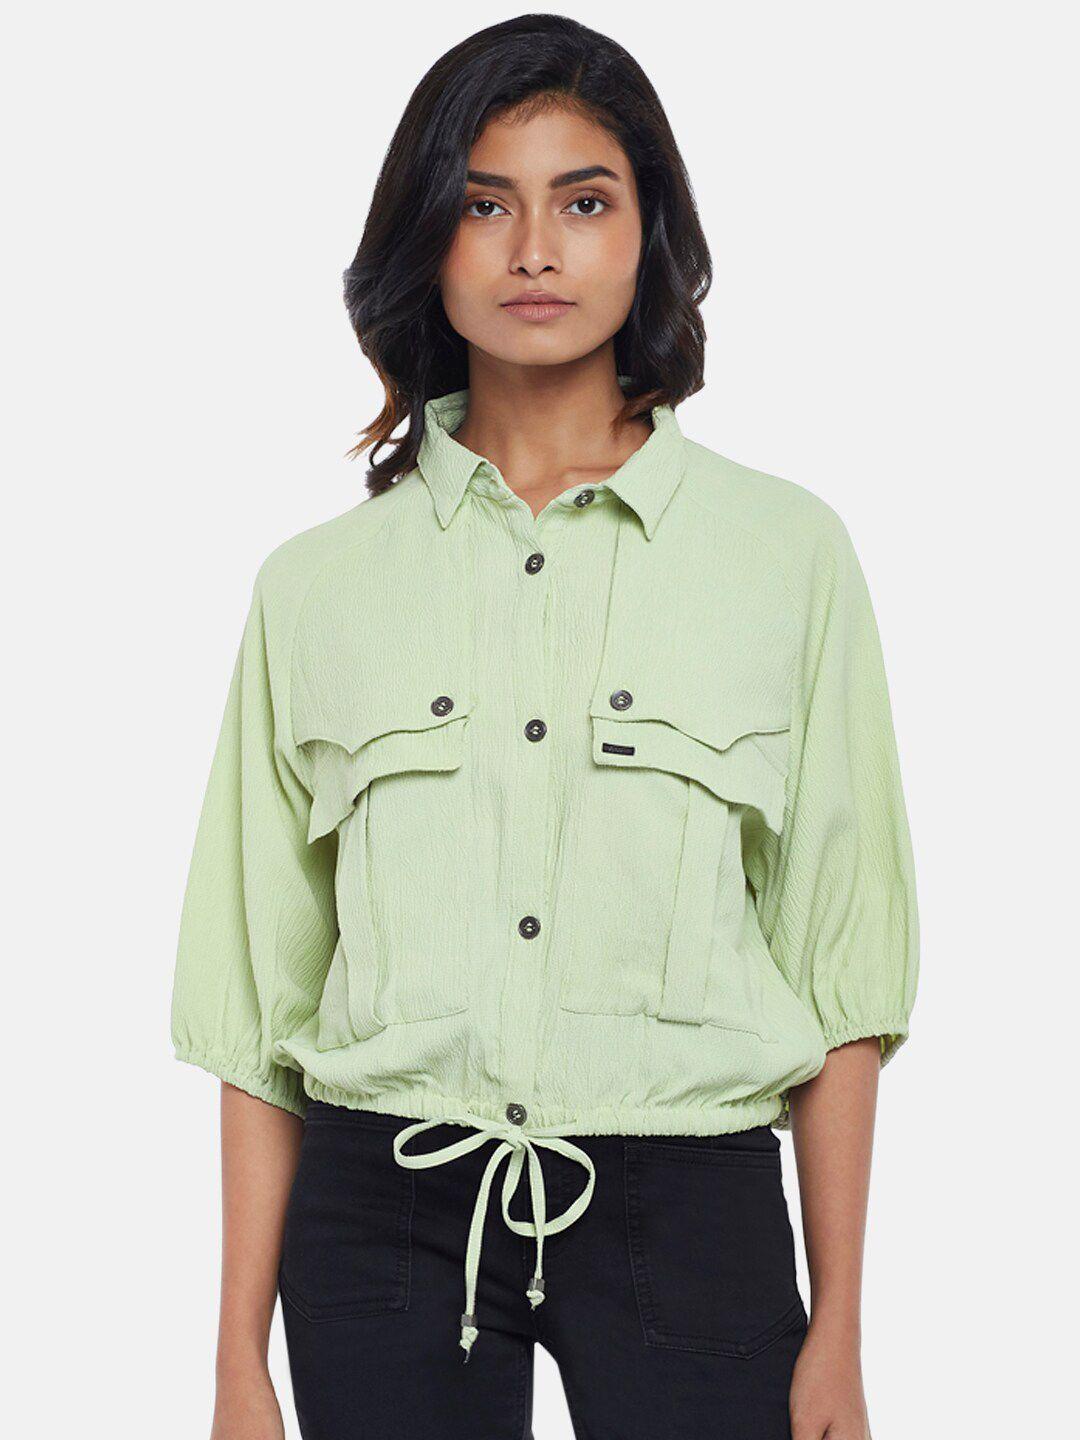 sf jeans by pantaloons women olive green regular fit casual shirt